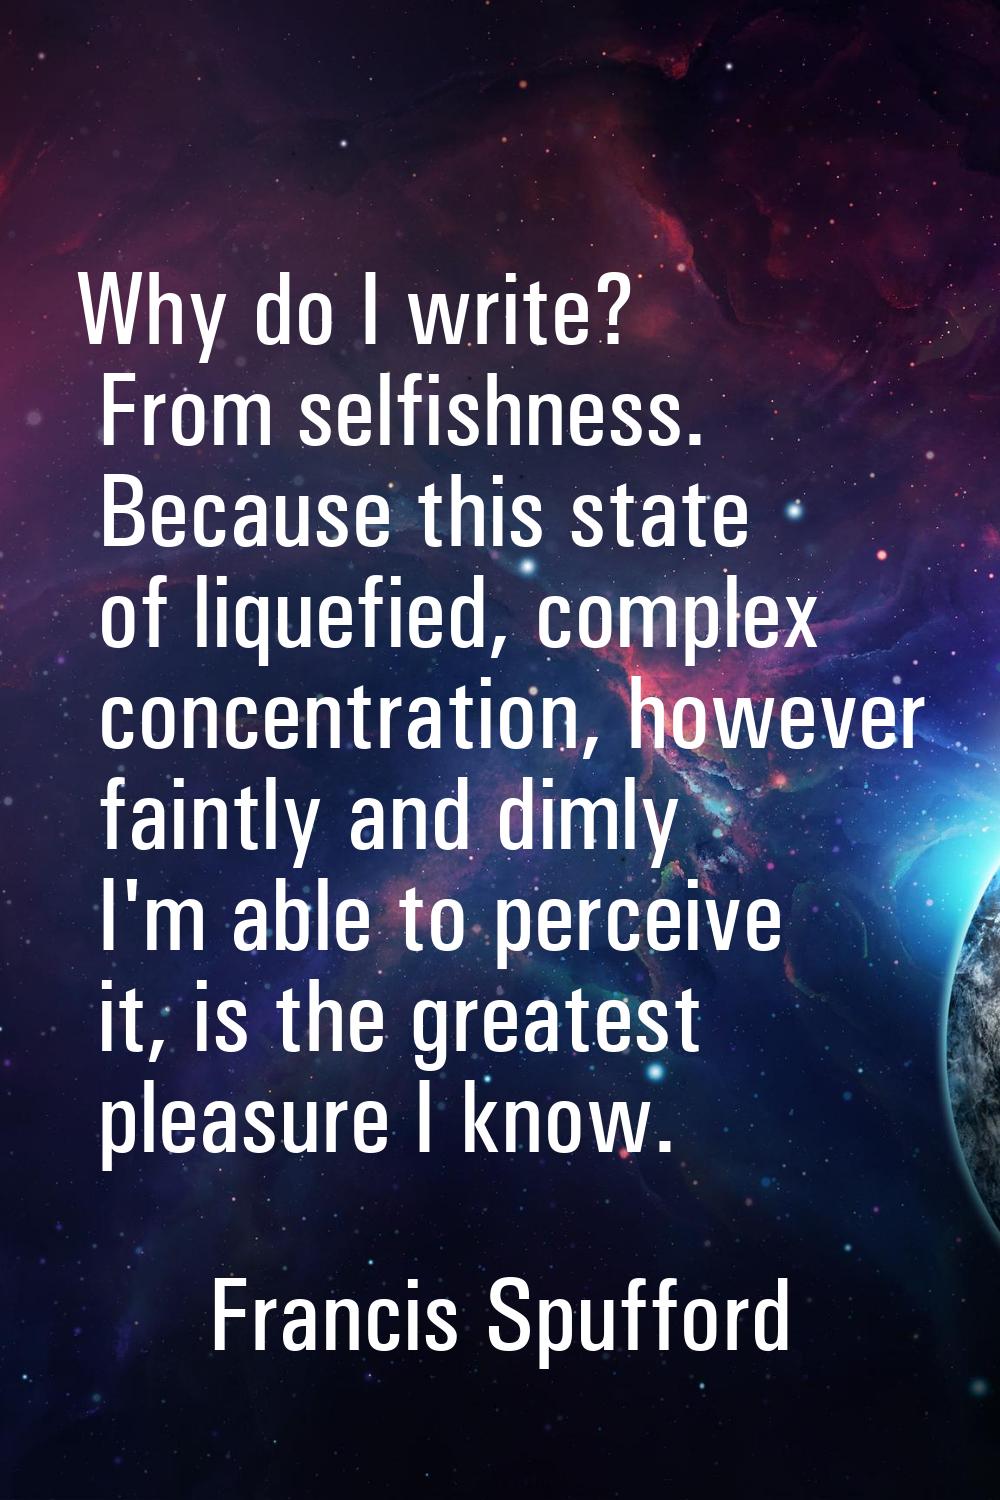 Why do I write? From selfishness. Because this state of liquefied, complex concentration, however f